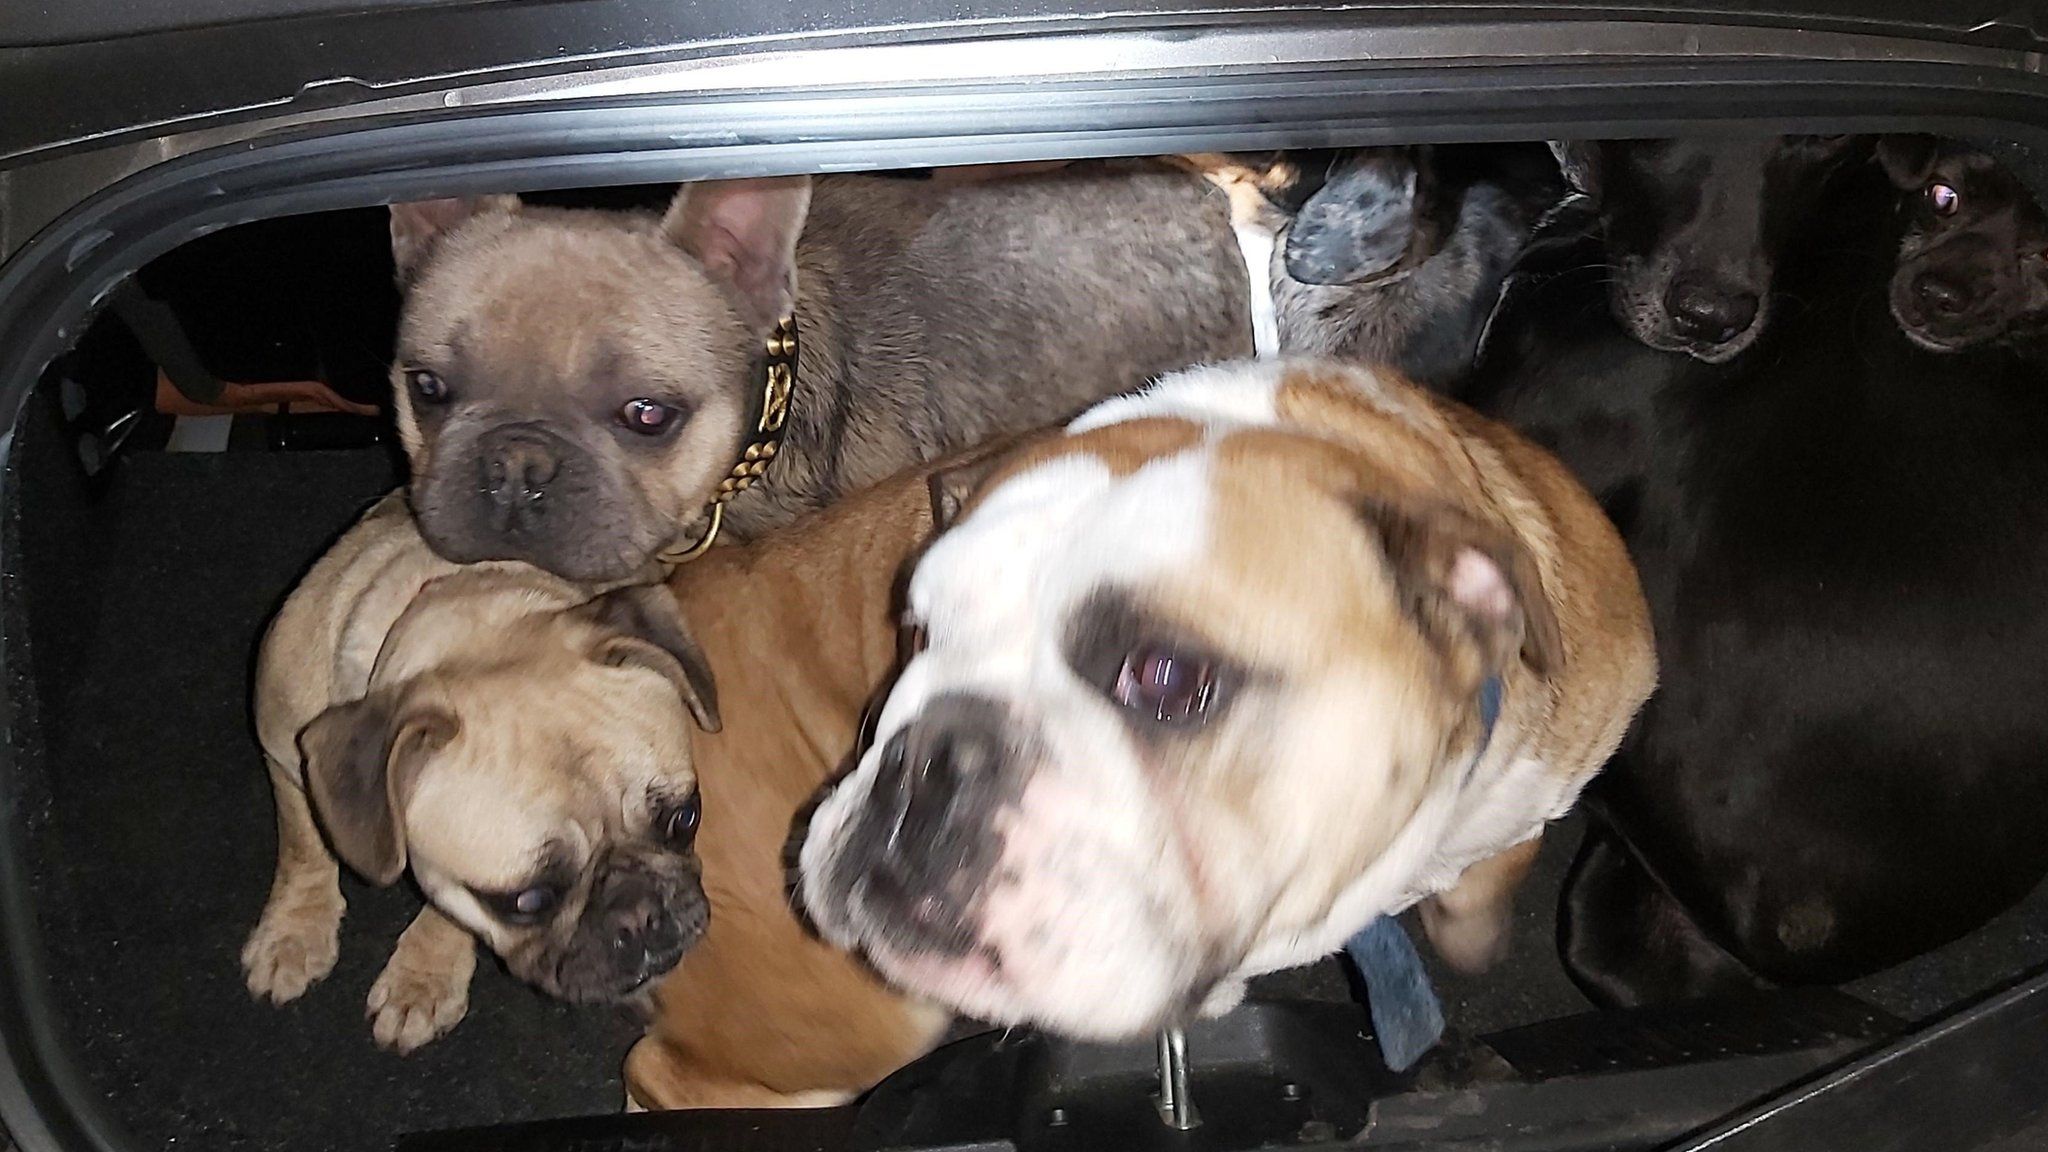 Stolen dogs found in back of vehicle